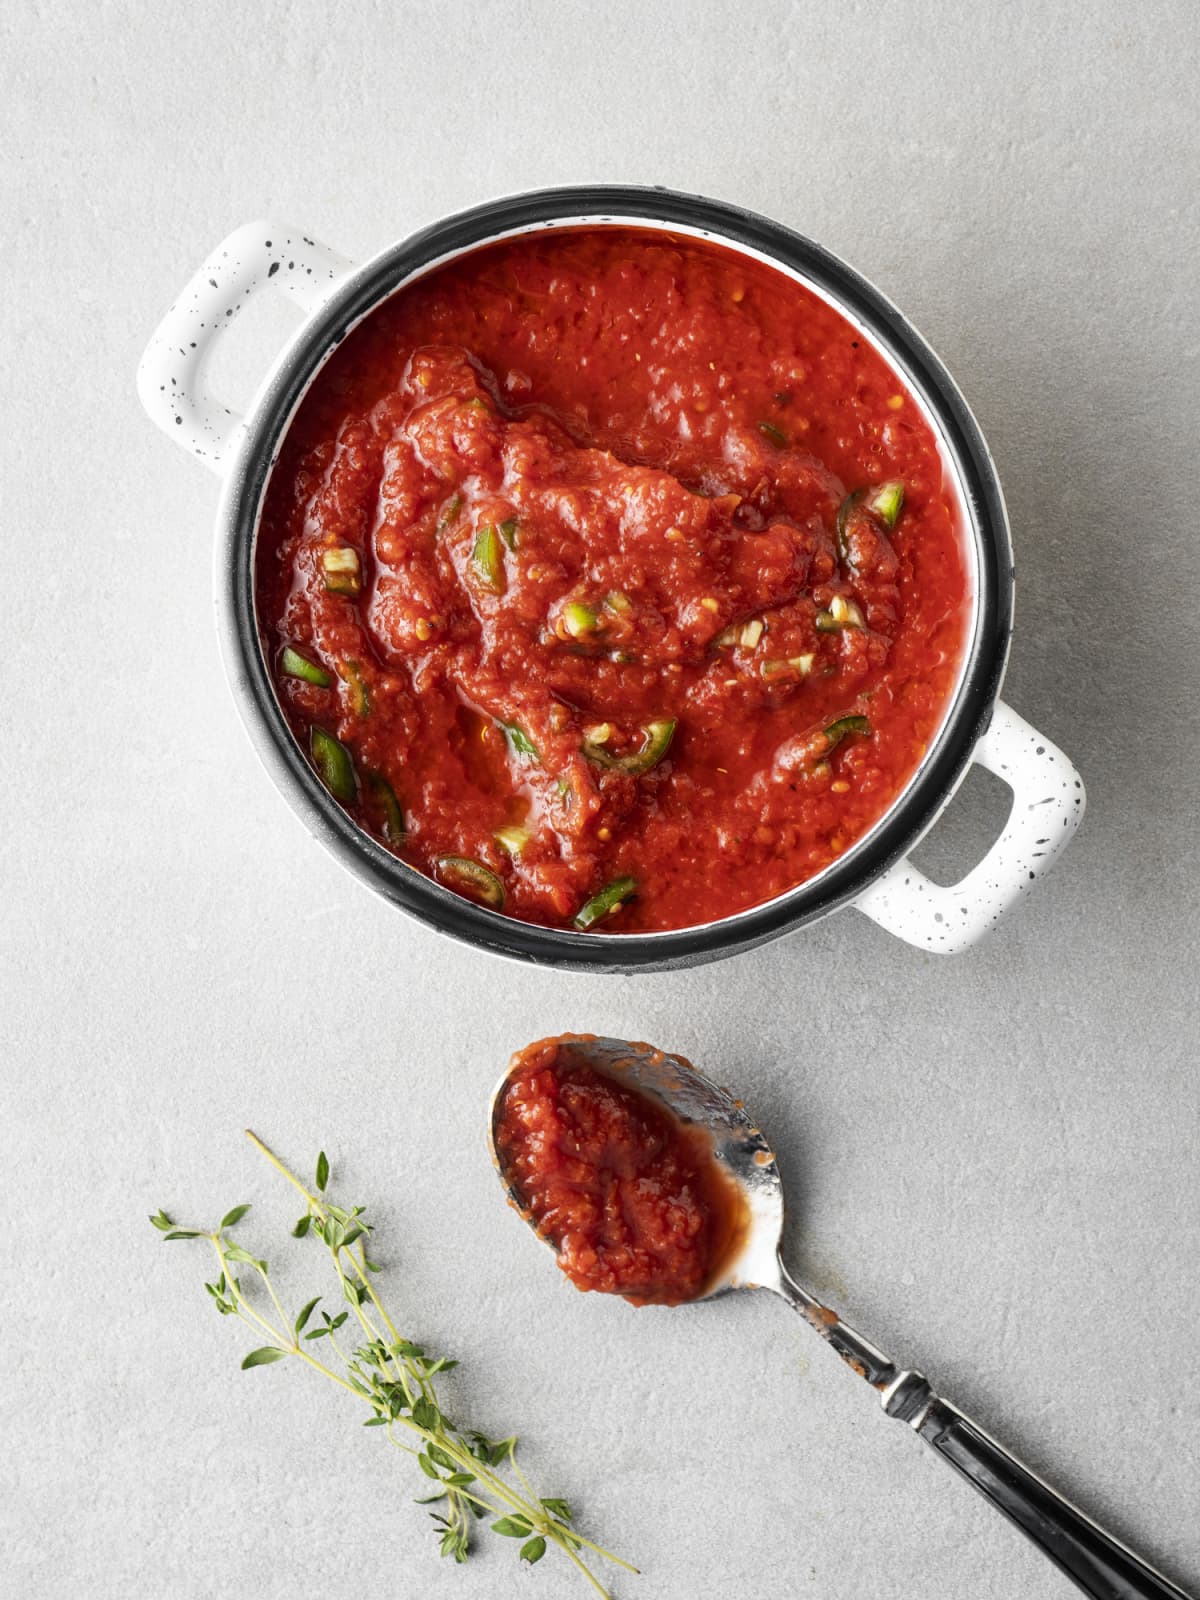 Pot of tomato sauce with herbs on the side